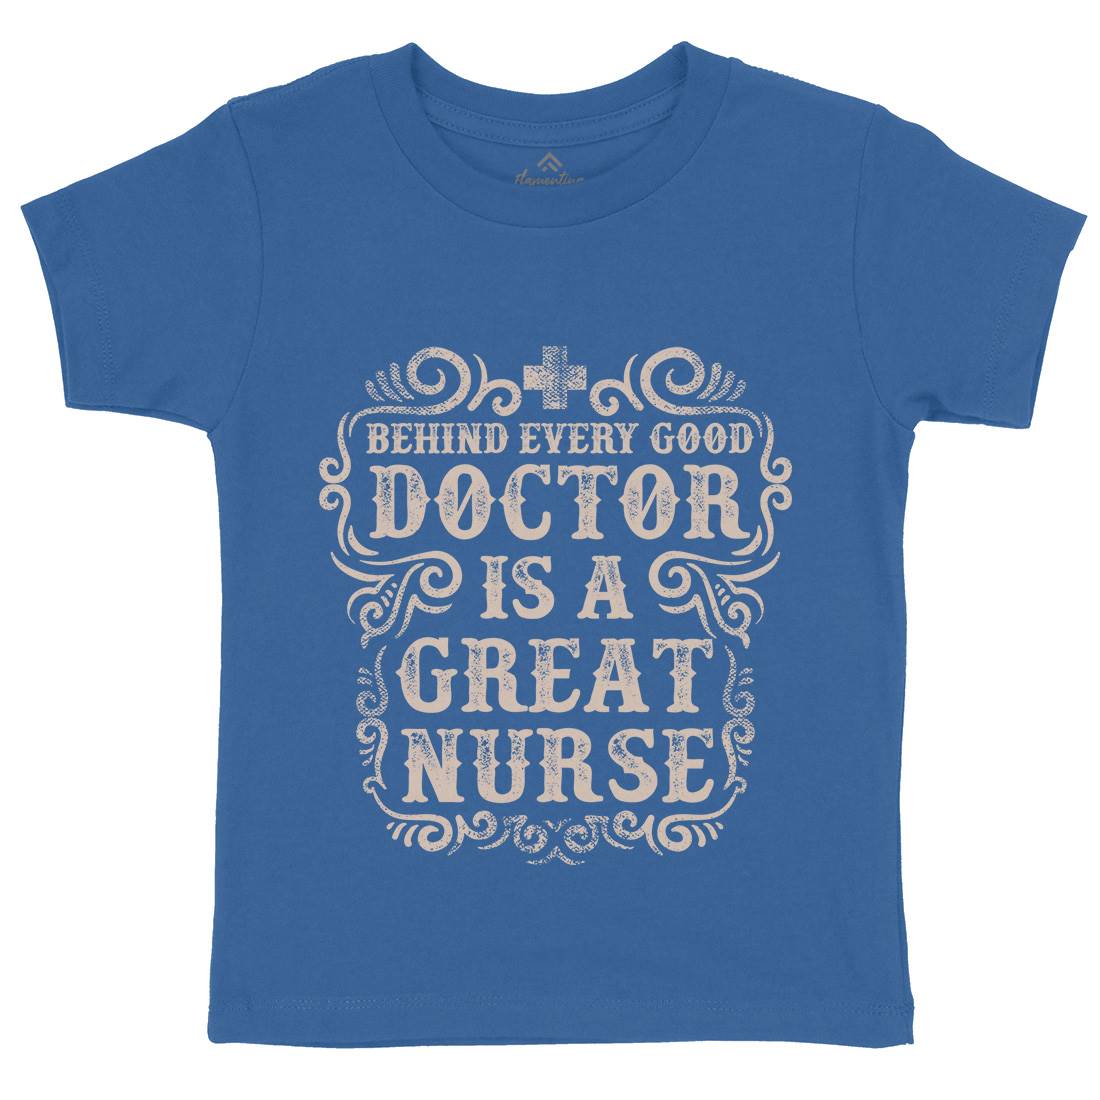 Behind Every Good Doctor Is A Great Nurse Kids Organic Crew Neck T-Shirt Work C910